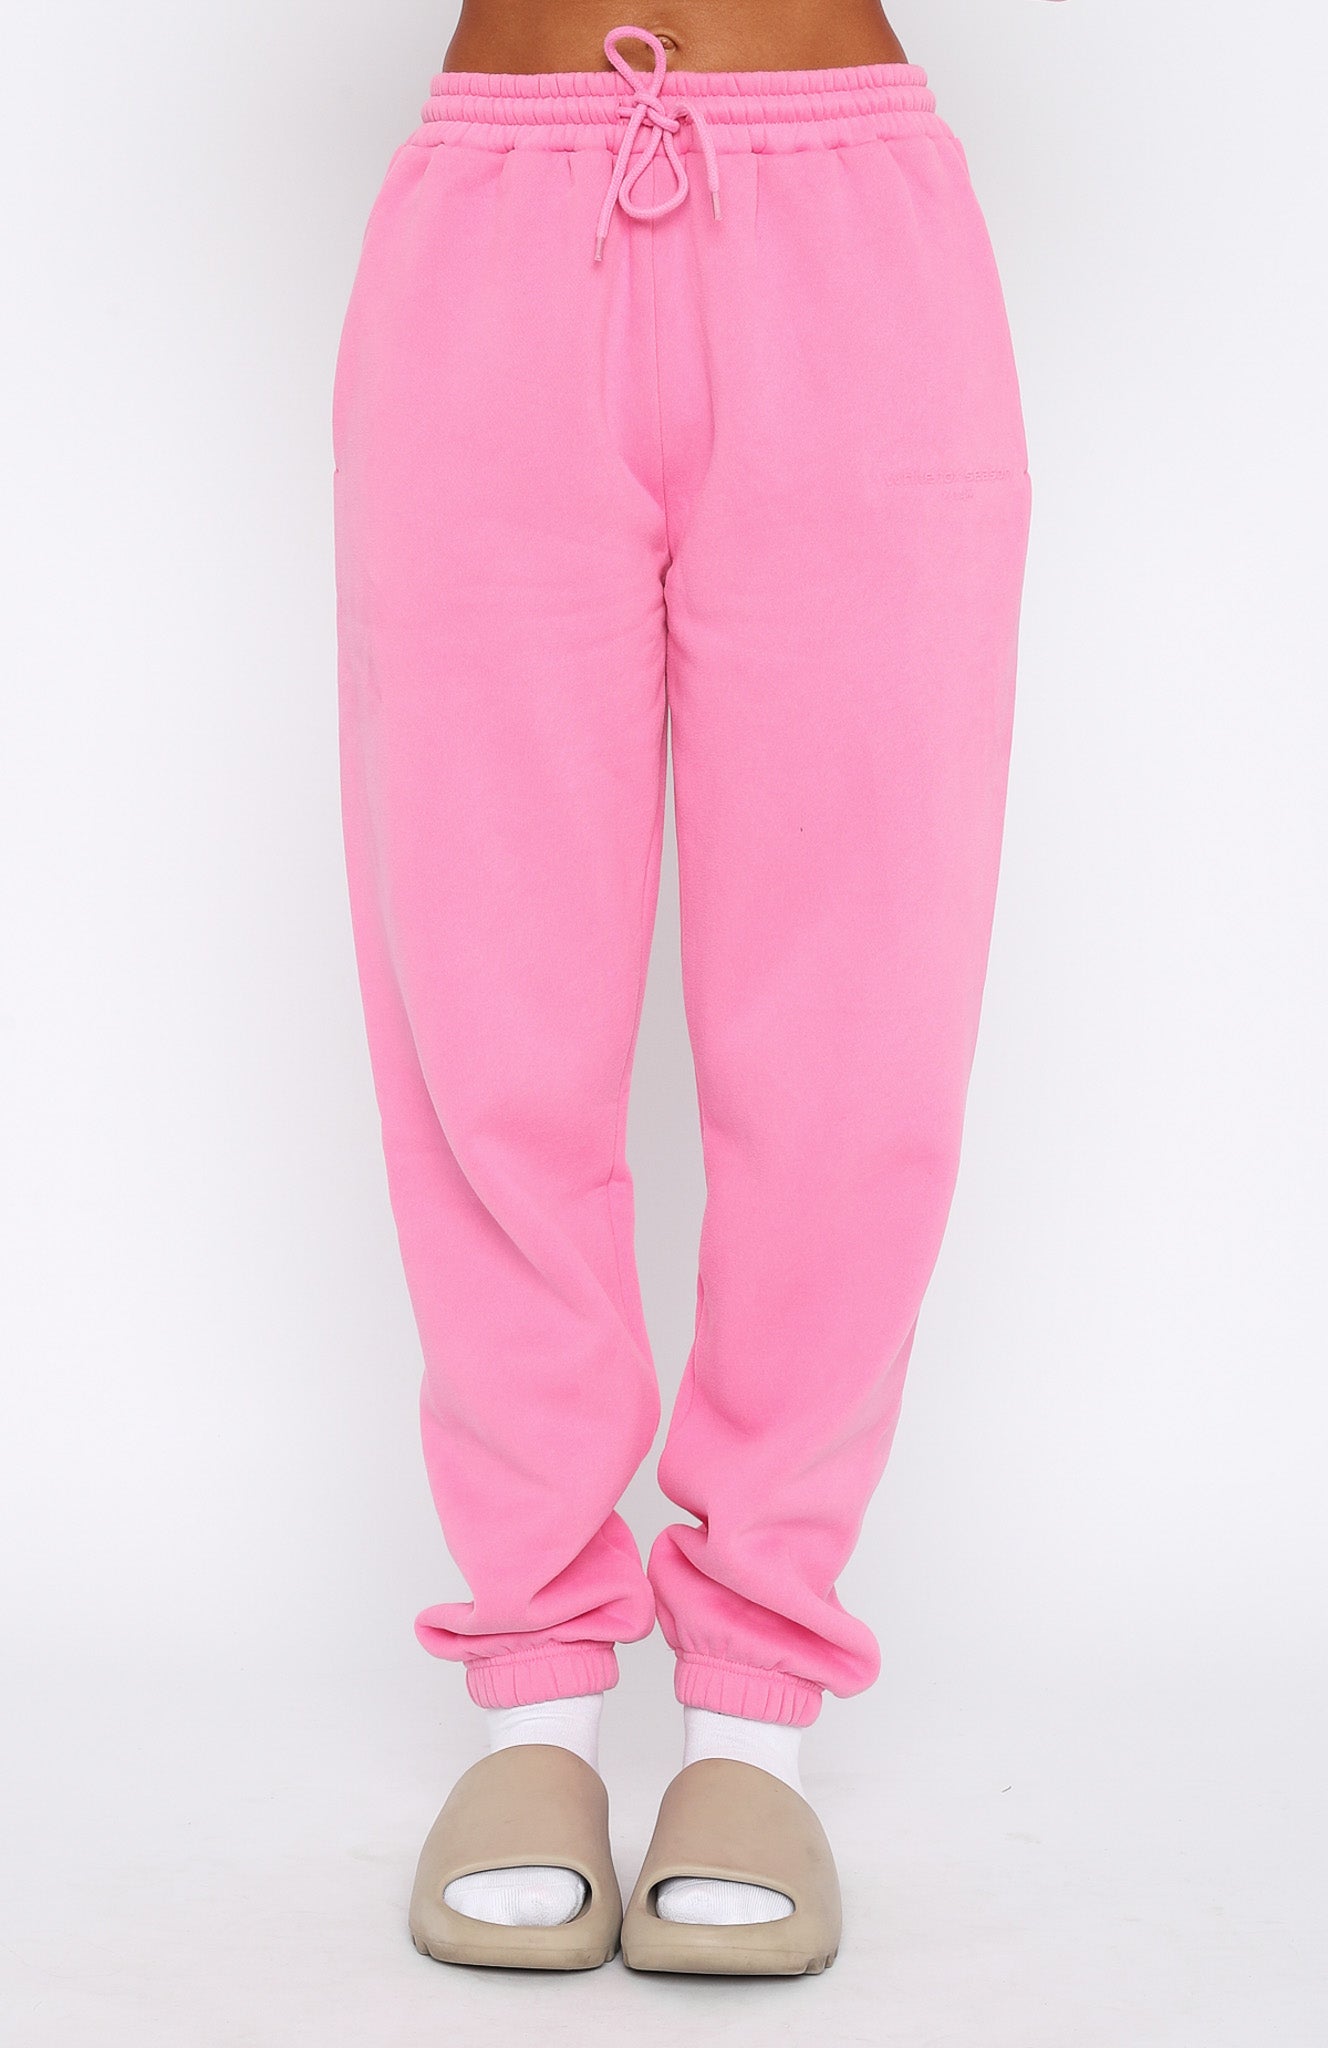 Ford Warriors in Pink Women's Jogger- Official Ford Merchandise